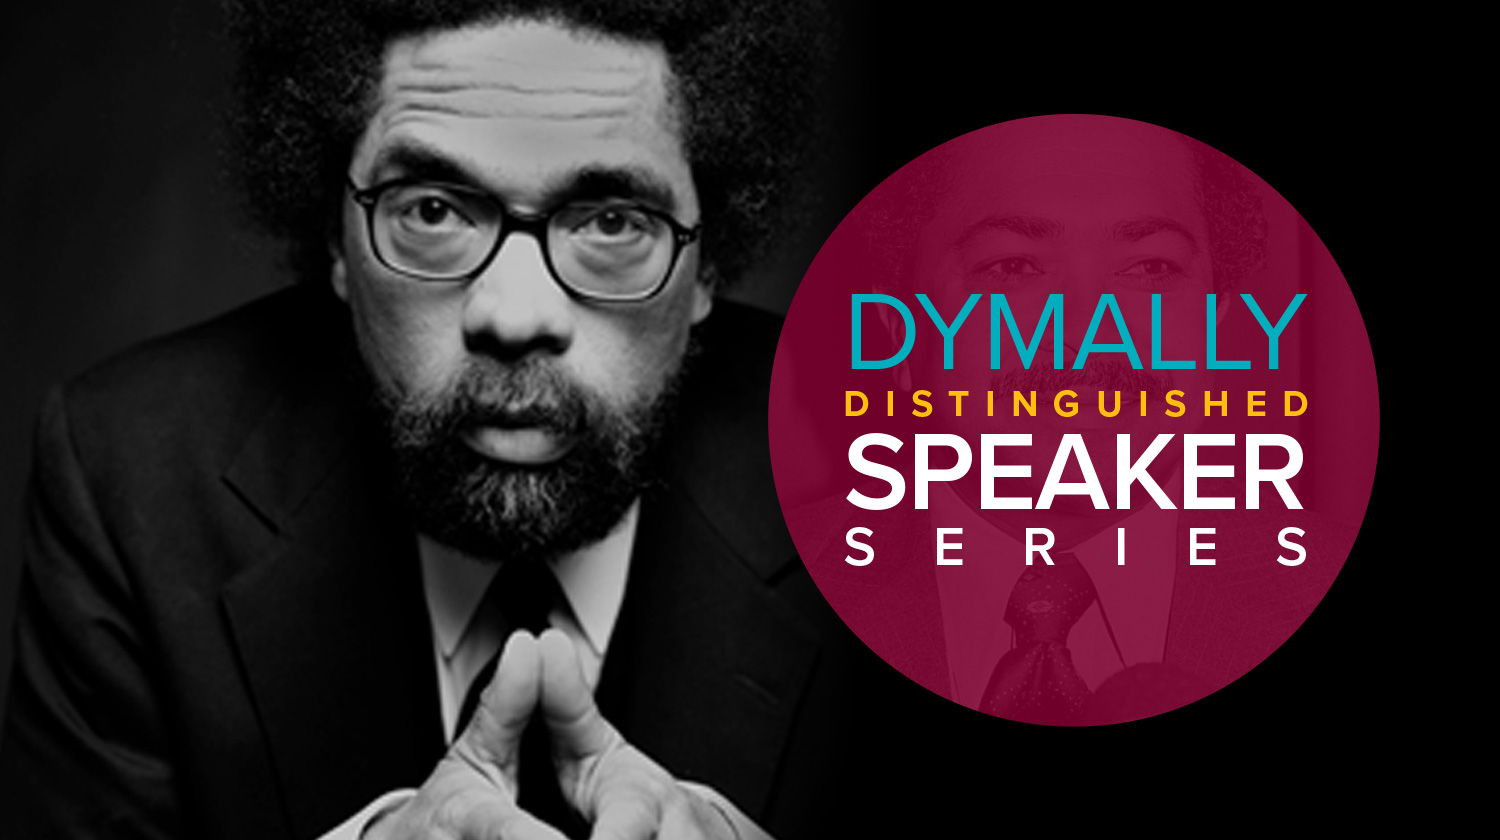 Why I’m Rooting for Dr. Cornel West